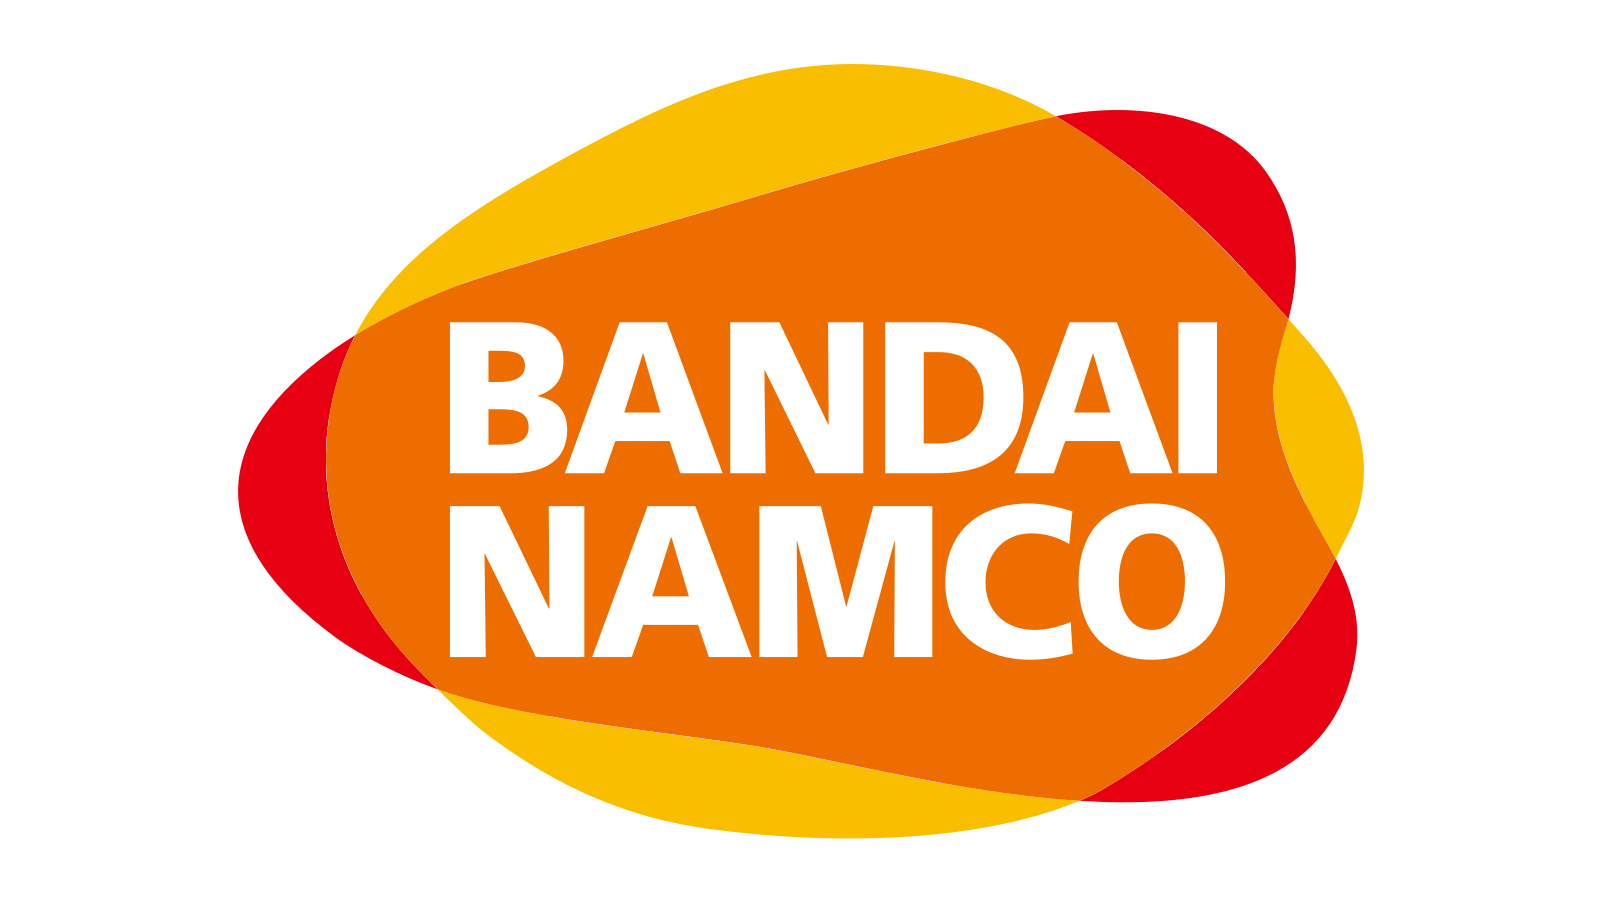 FGC Commentator Romanova will now be part of Bandai Namco's SMM team